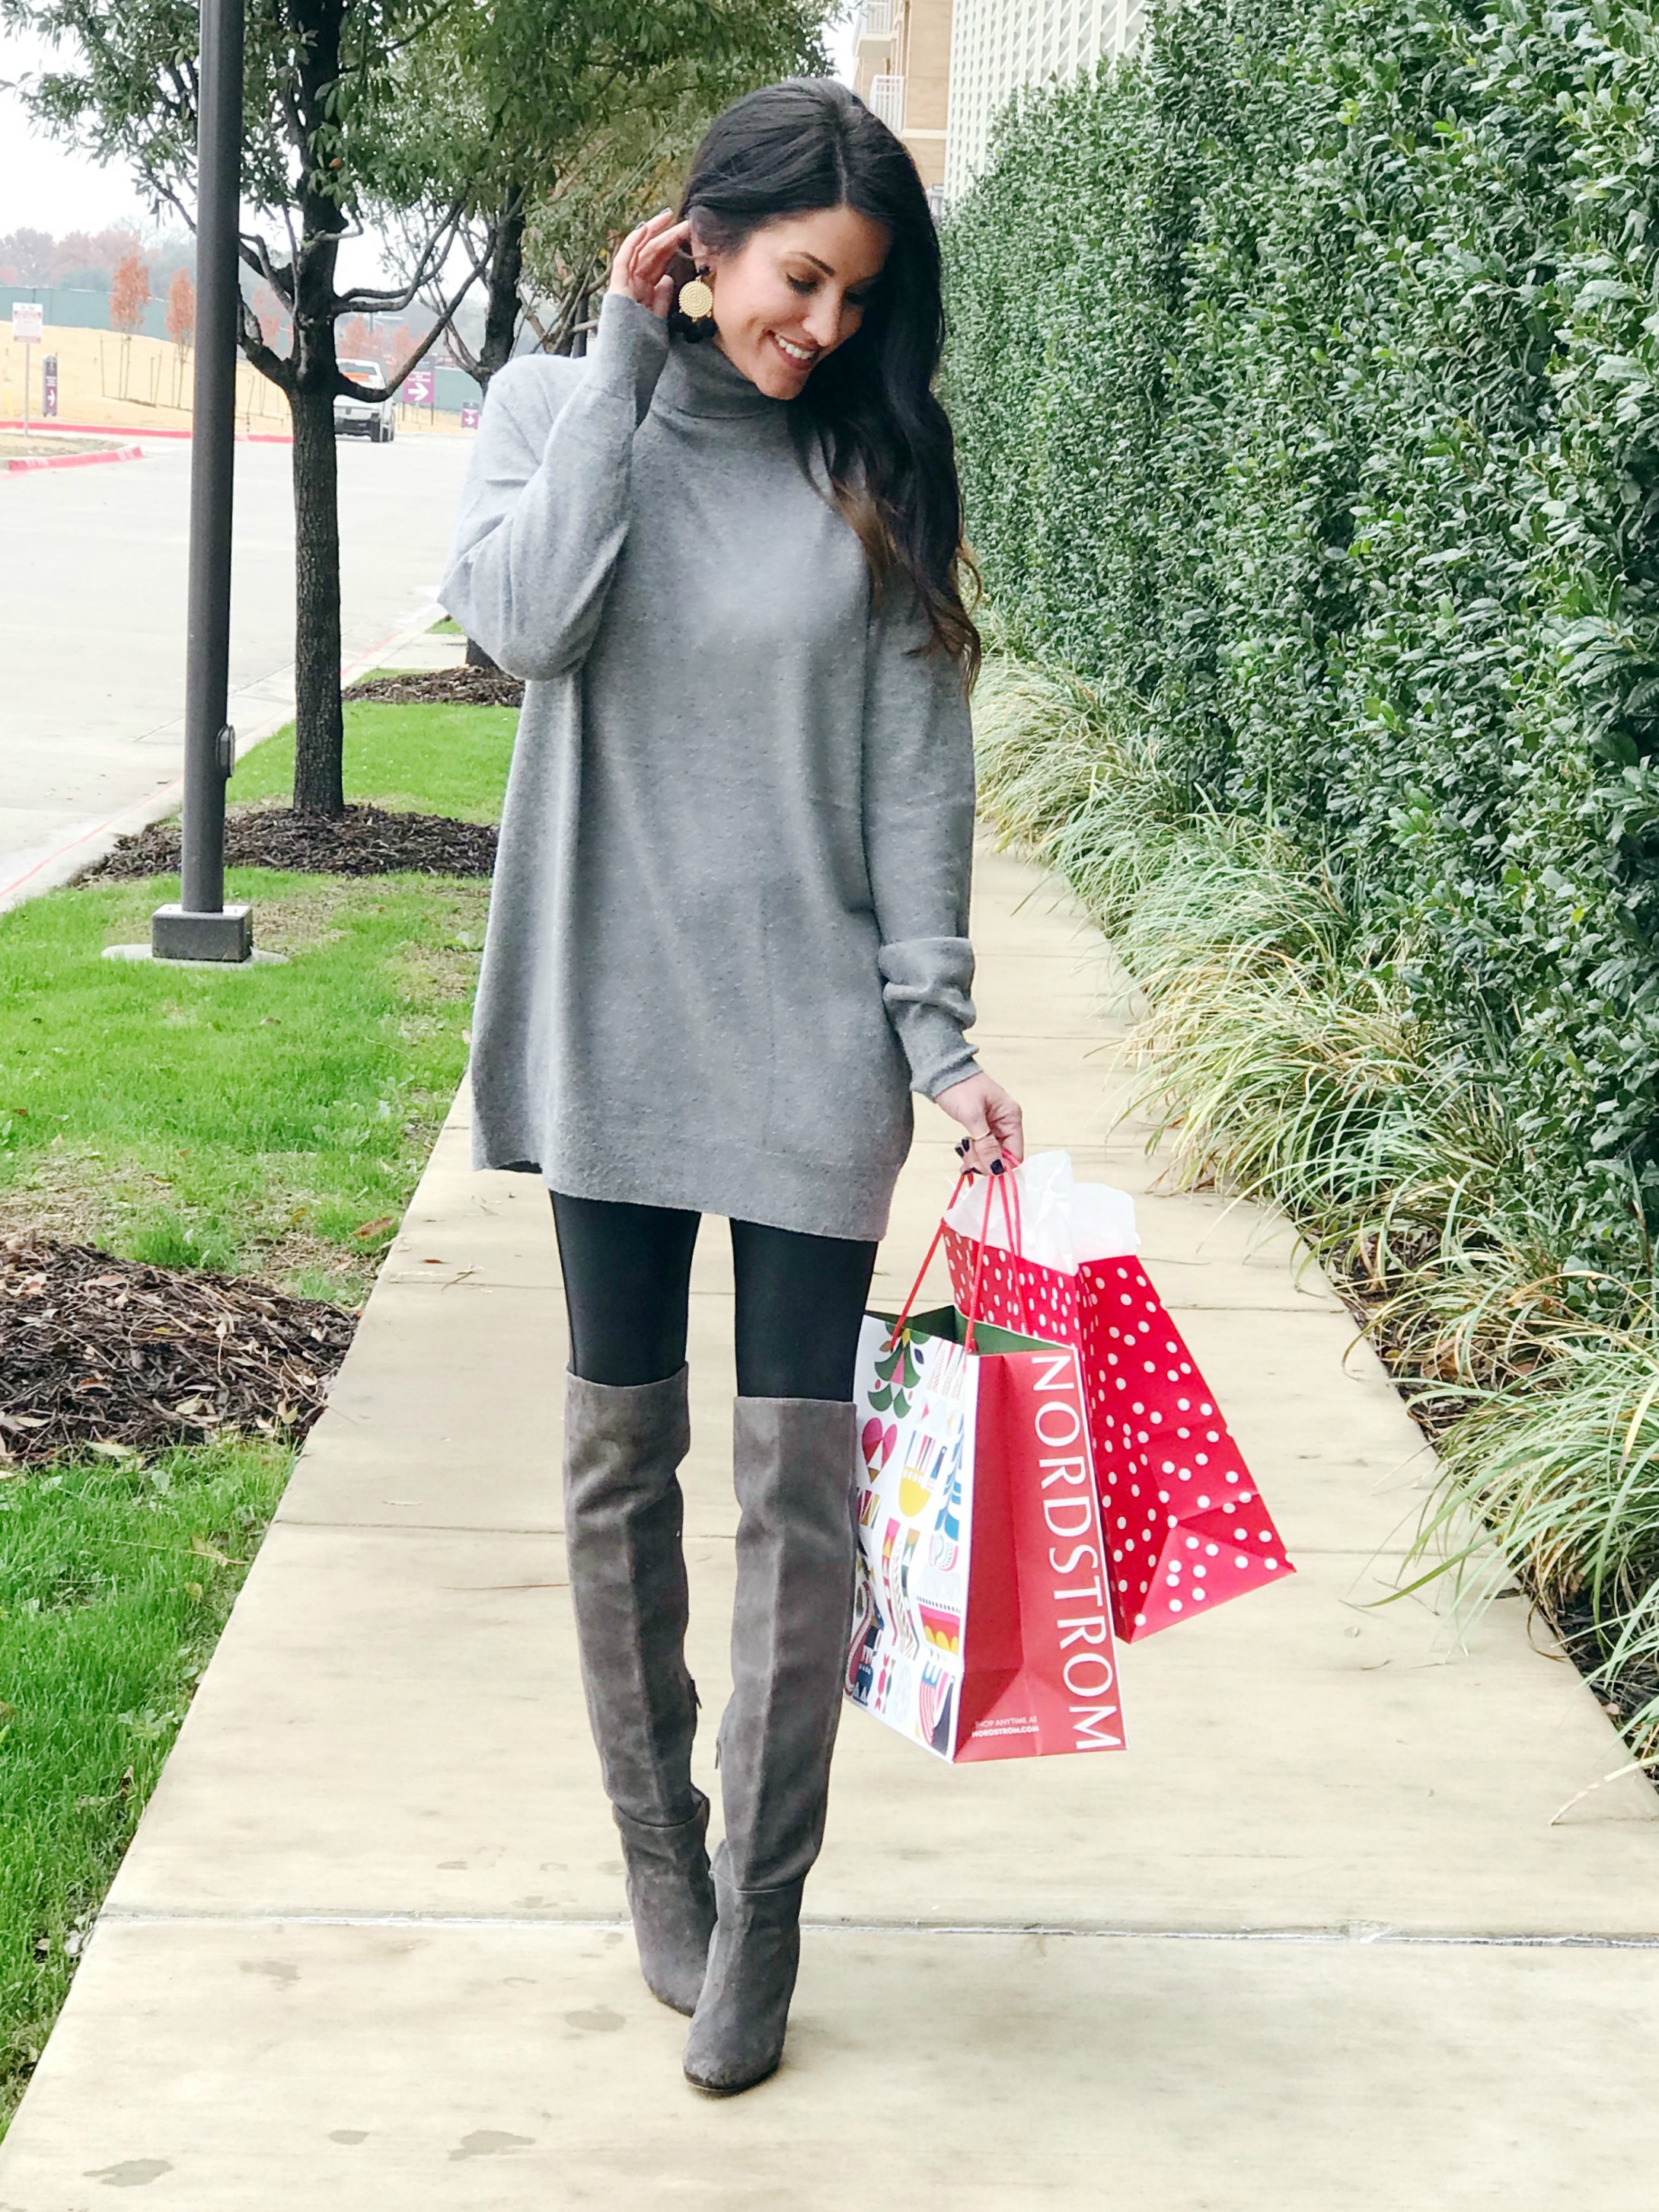 Tunic sweater and boots